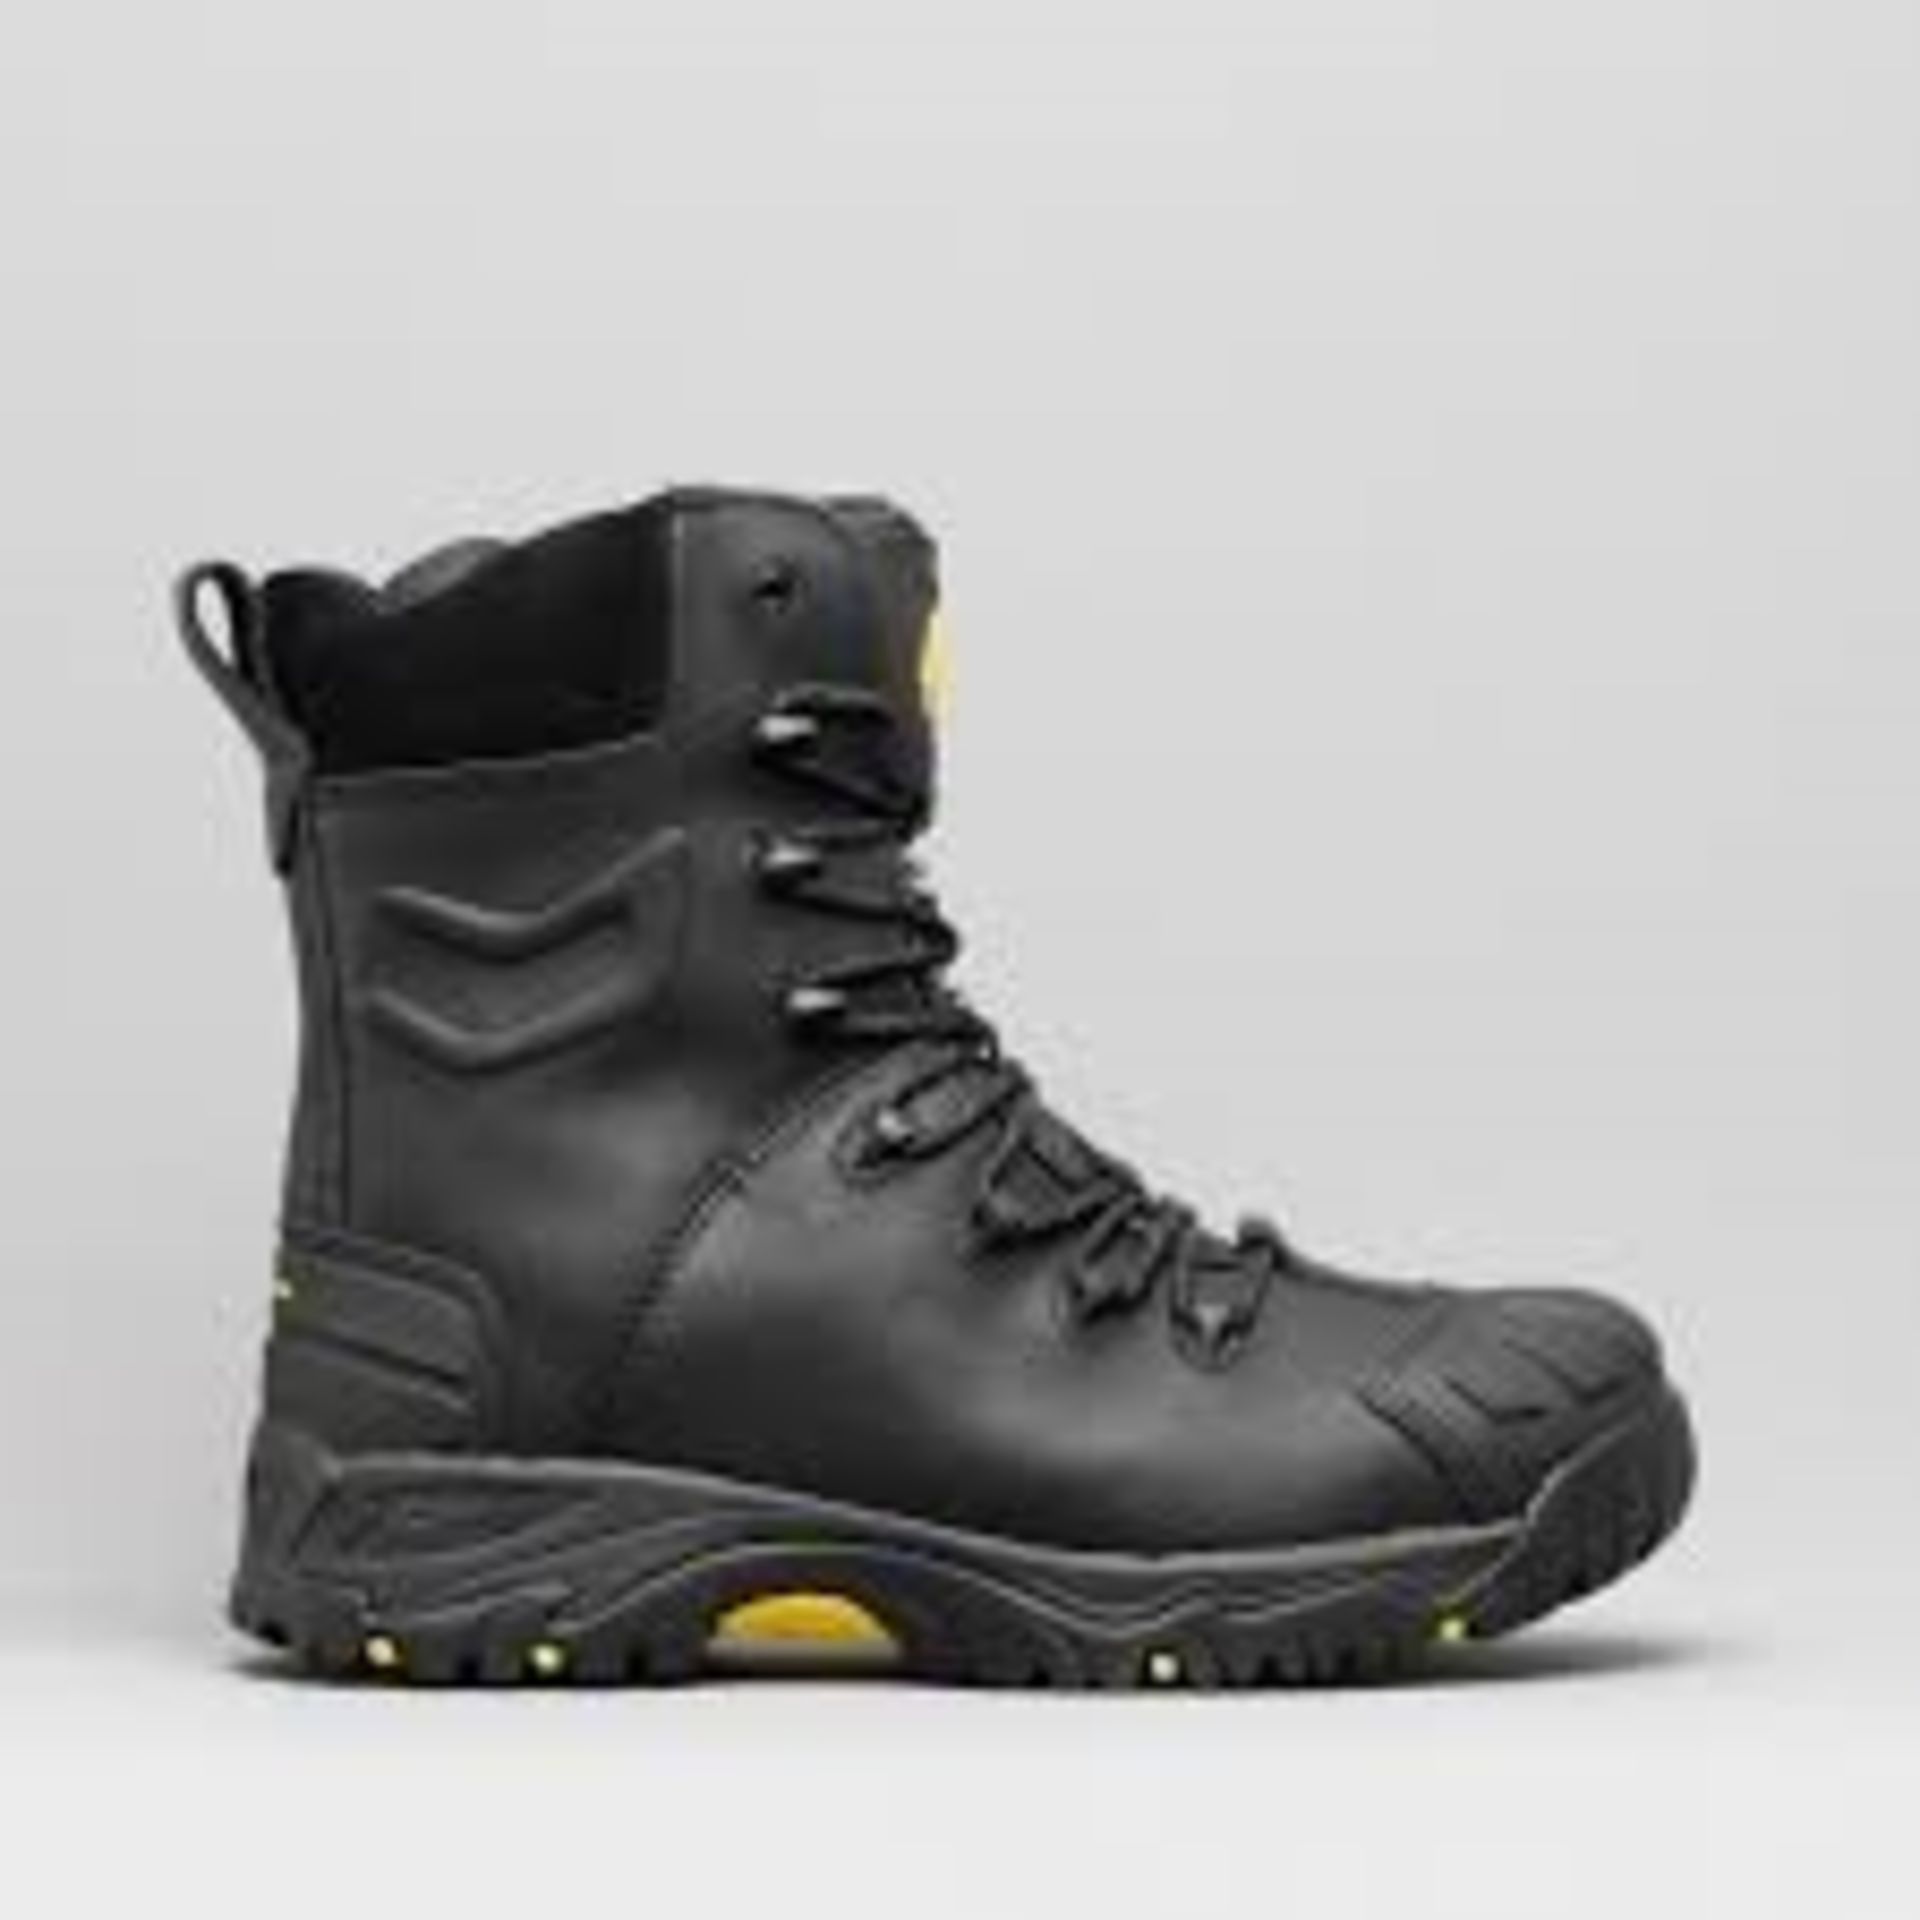 1 AS NEW BOXED AMBLERS FS999 SAFETY BOOTS IN BLACK / SIZE - 6 / PN - 549 / RRP £58.99 (VIEWING